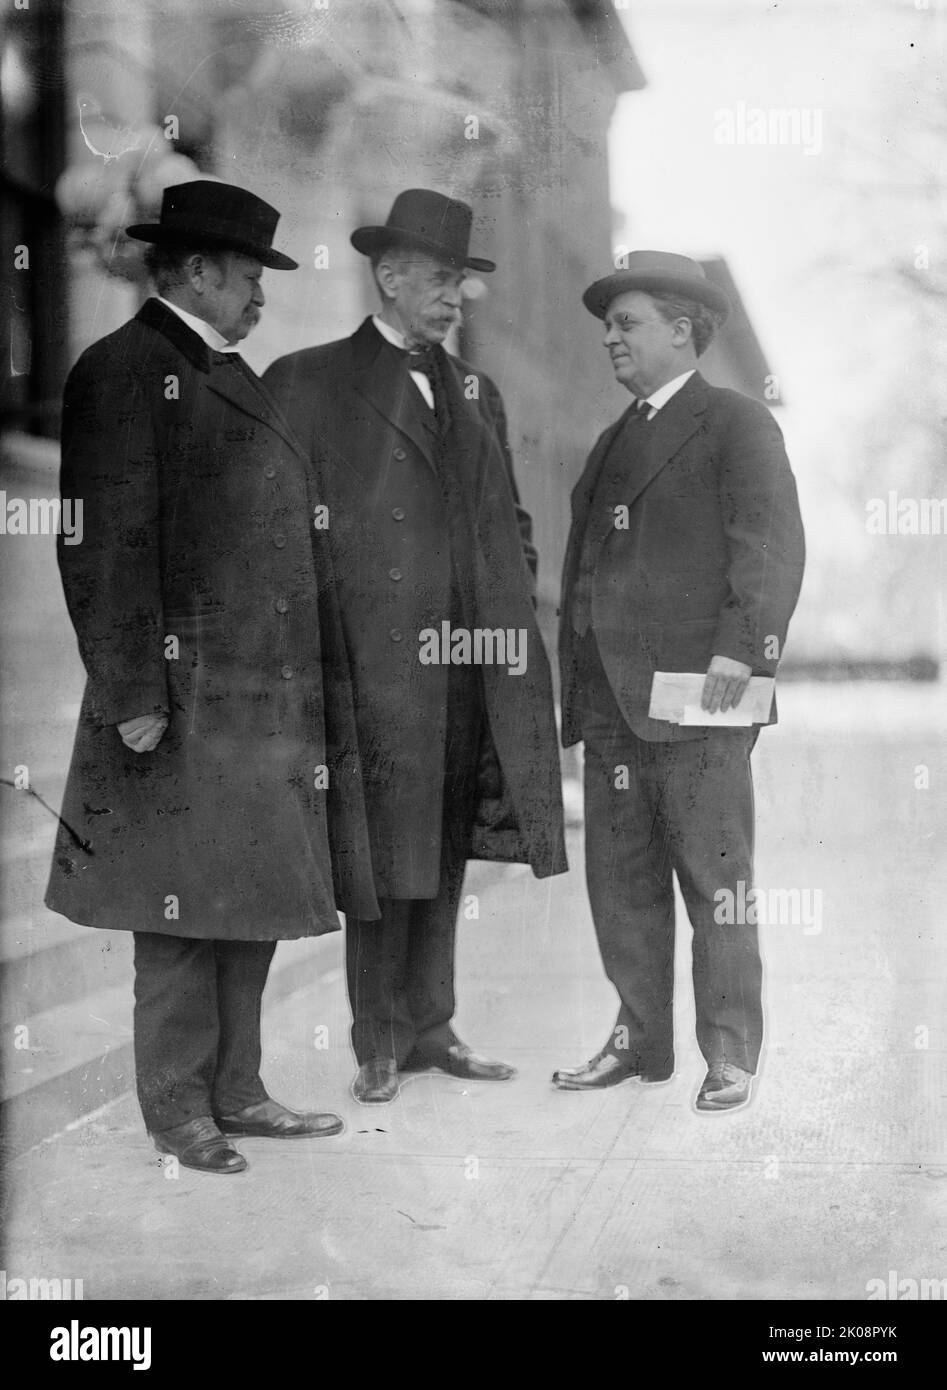 Democratic National Committee - Governor Benton McMillin of Tennessee, Vertress of Tennessee, Wrey Woodson, 1911. [US politicians]. Stock Photo